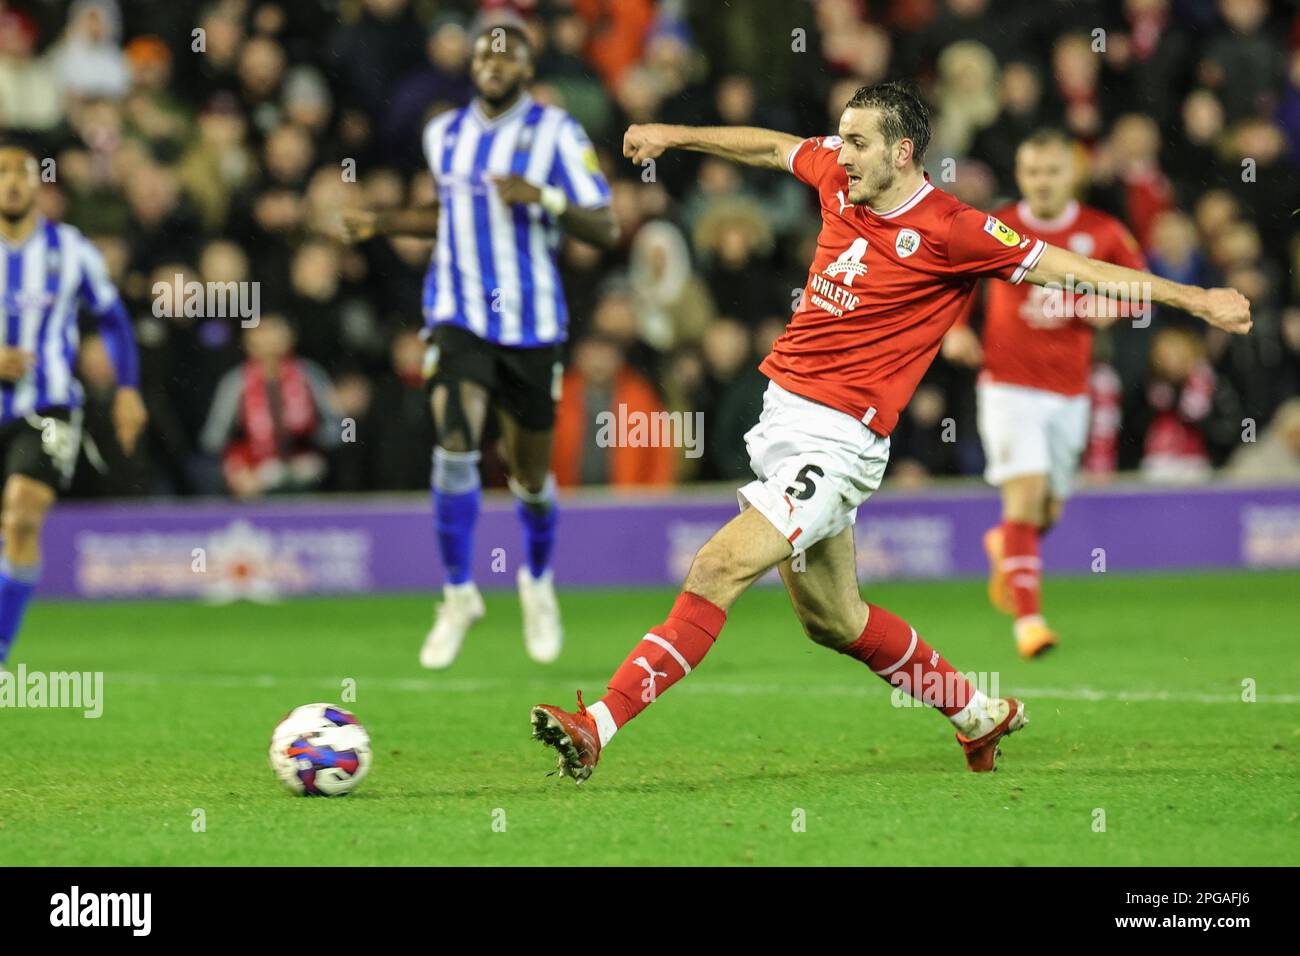 Liam Kitching #5 of Barnsley scores to make it 4-2 during the Sky Bet League 1 match Barnsley vs Sheffield Wednesday at Oakwell, Barnsley, United Kingdom, 21st March 2023  (Photo by Mark Cosgrove/News Images) Stock Photo